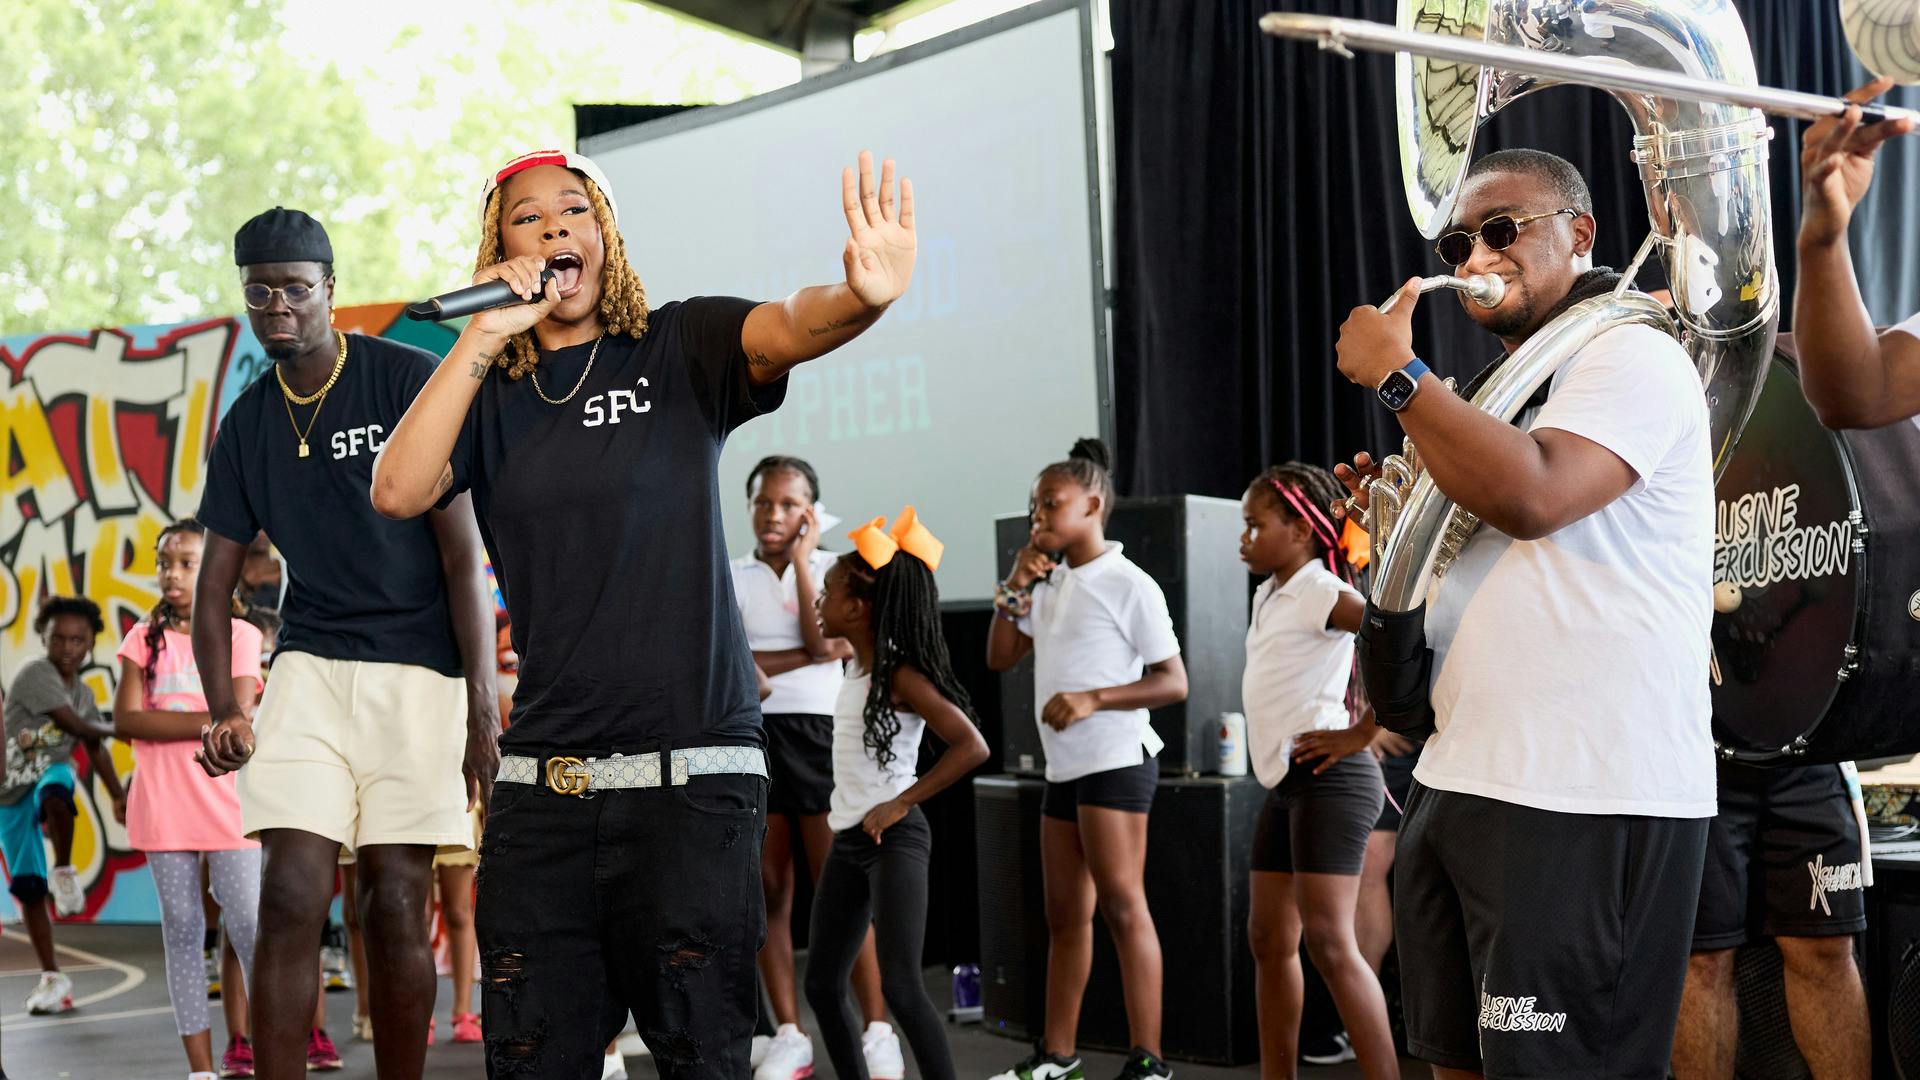 Freestyle Emcee from Soul Food Cypher performs at ATL Park Jam